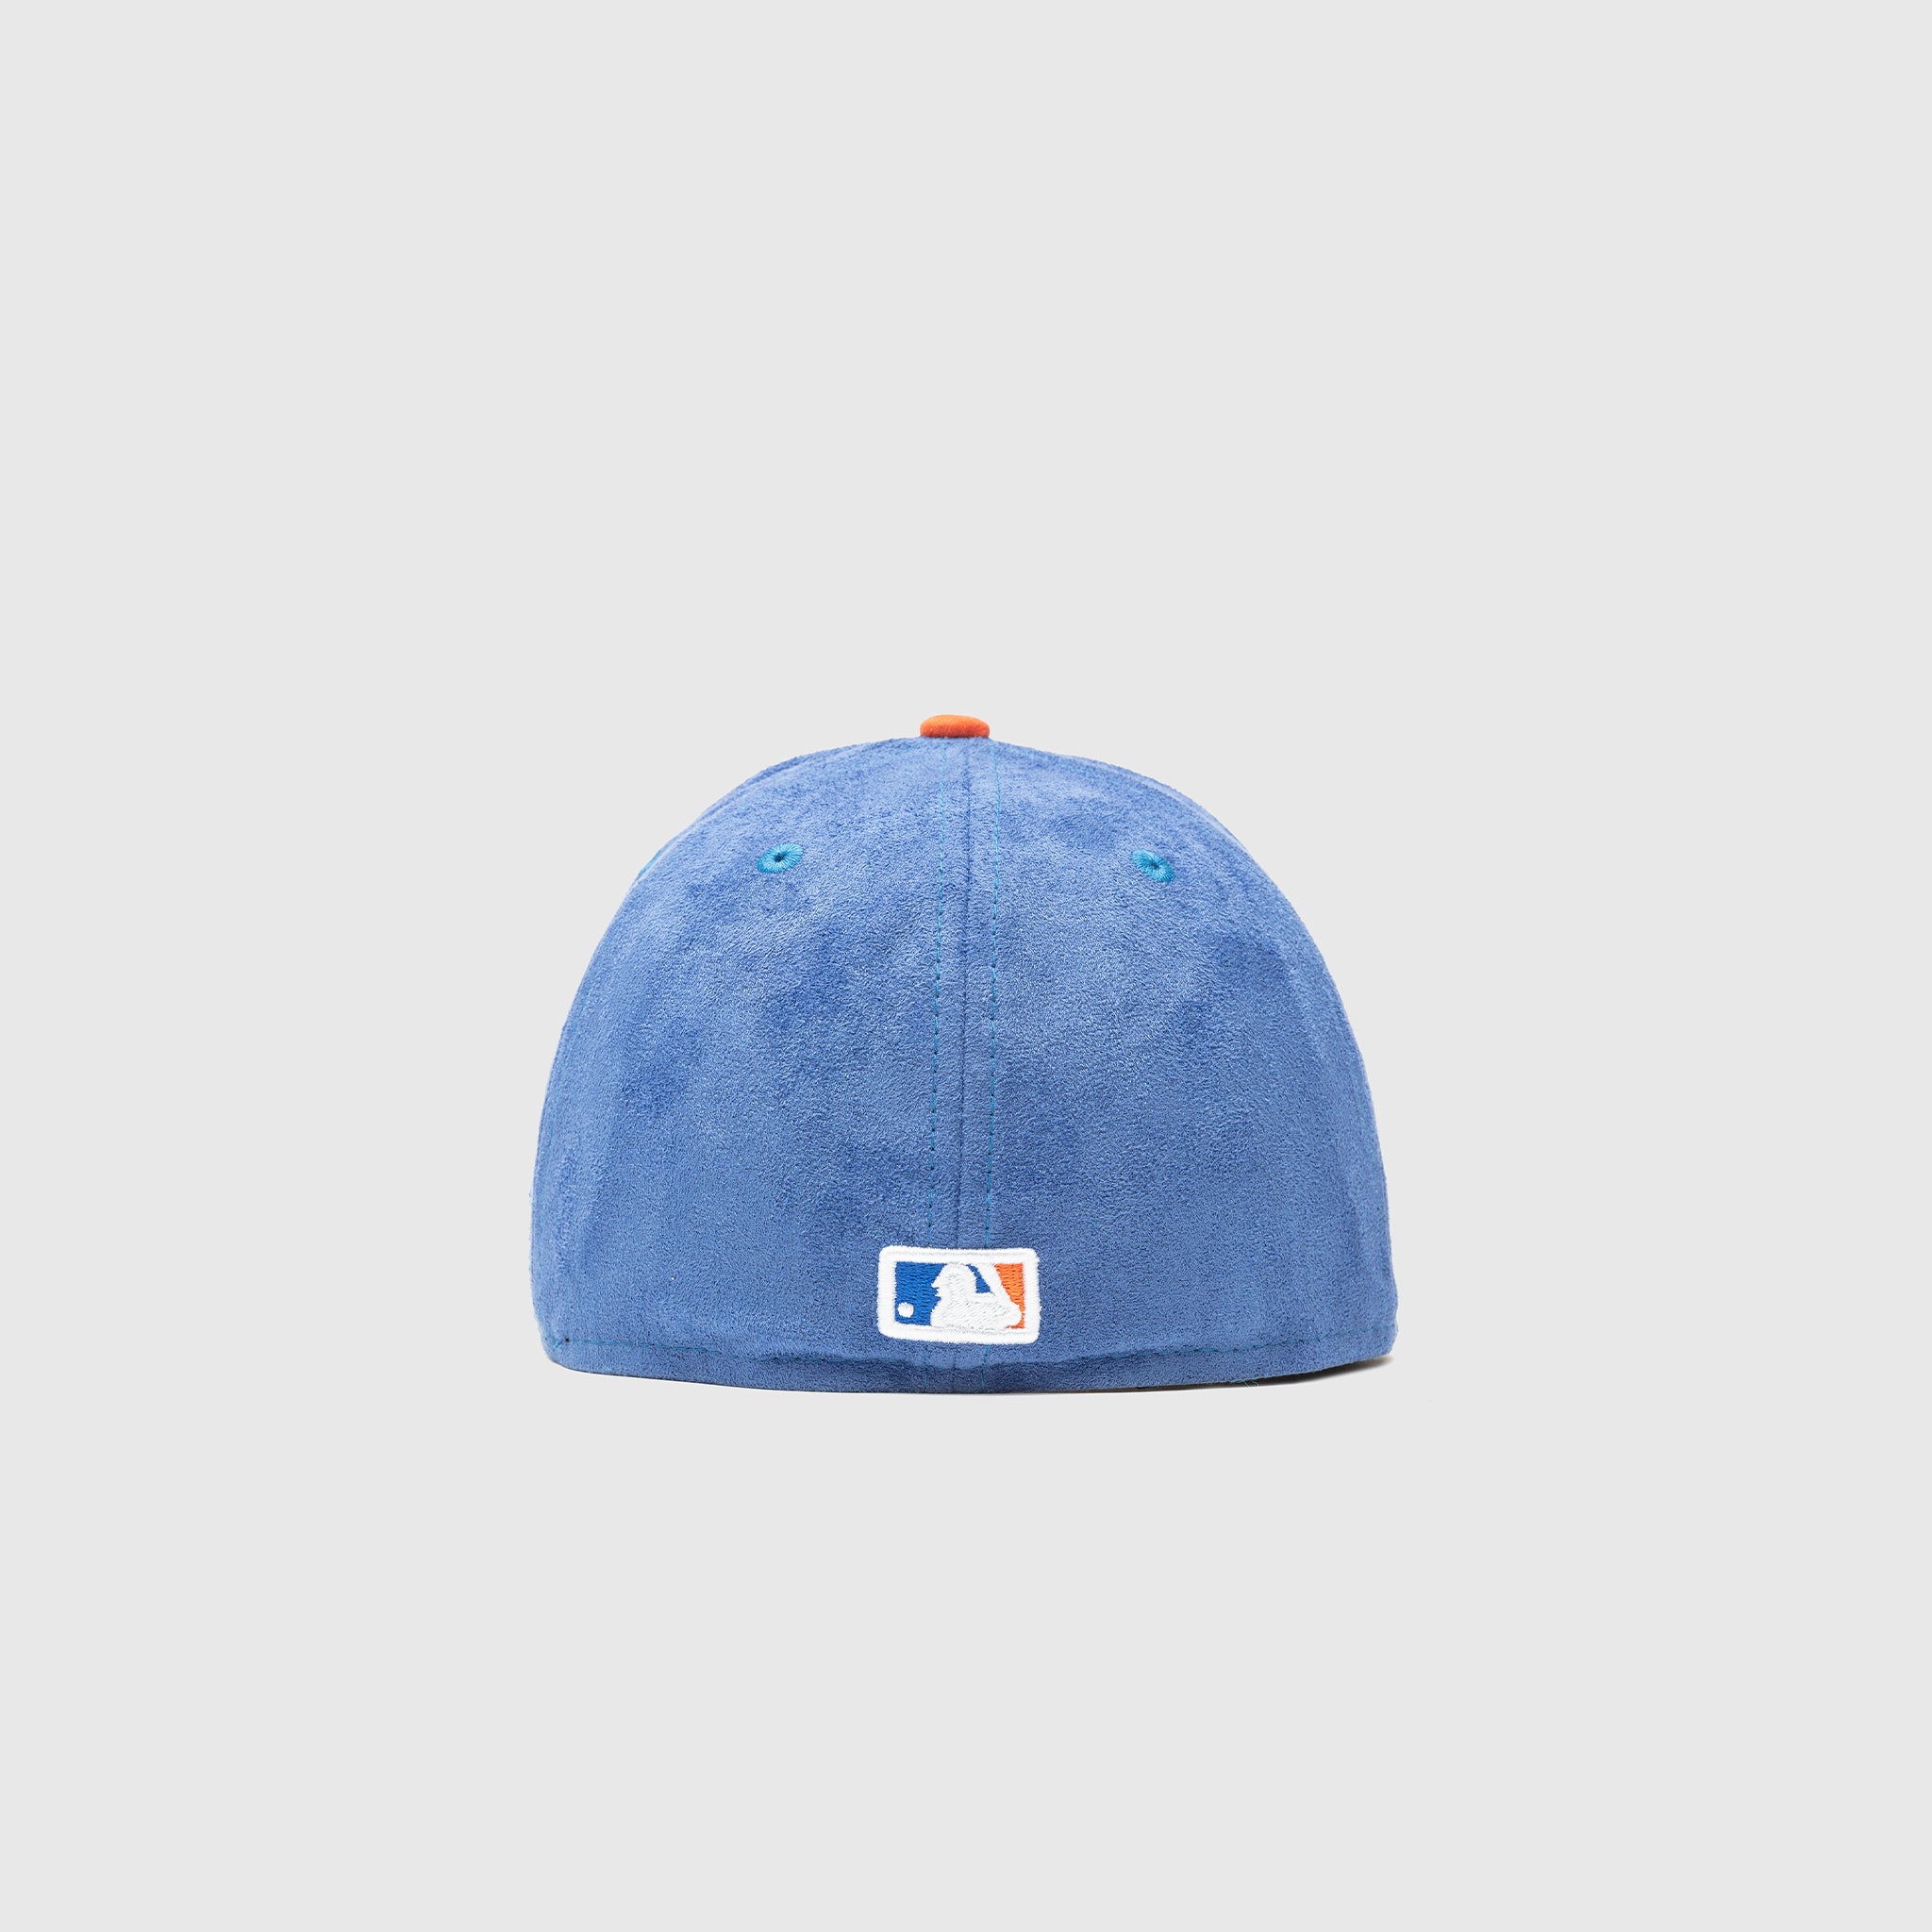 PACKER X NEW ERA NEW YORK METS 59FIFTY FITTED "SUEDE"